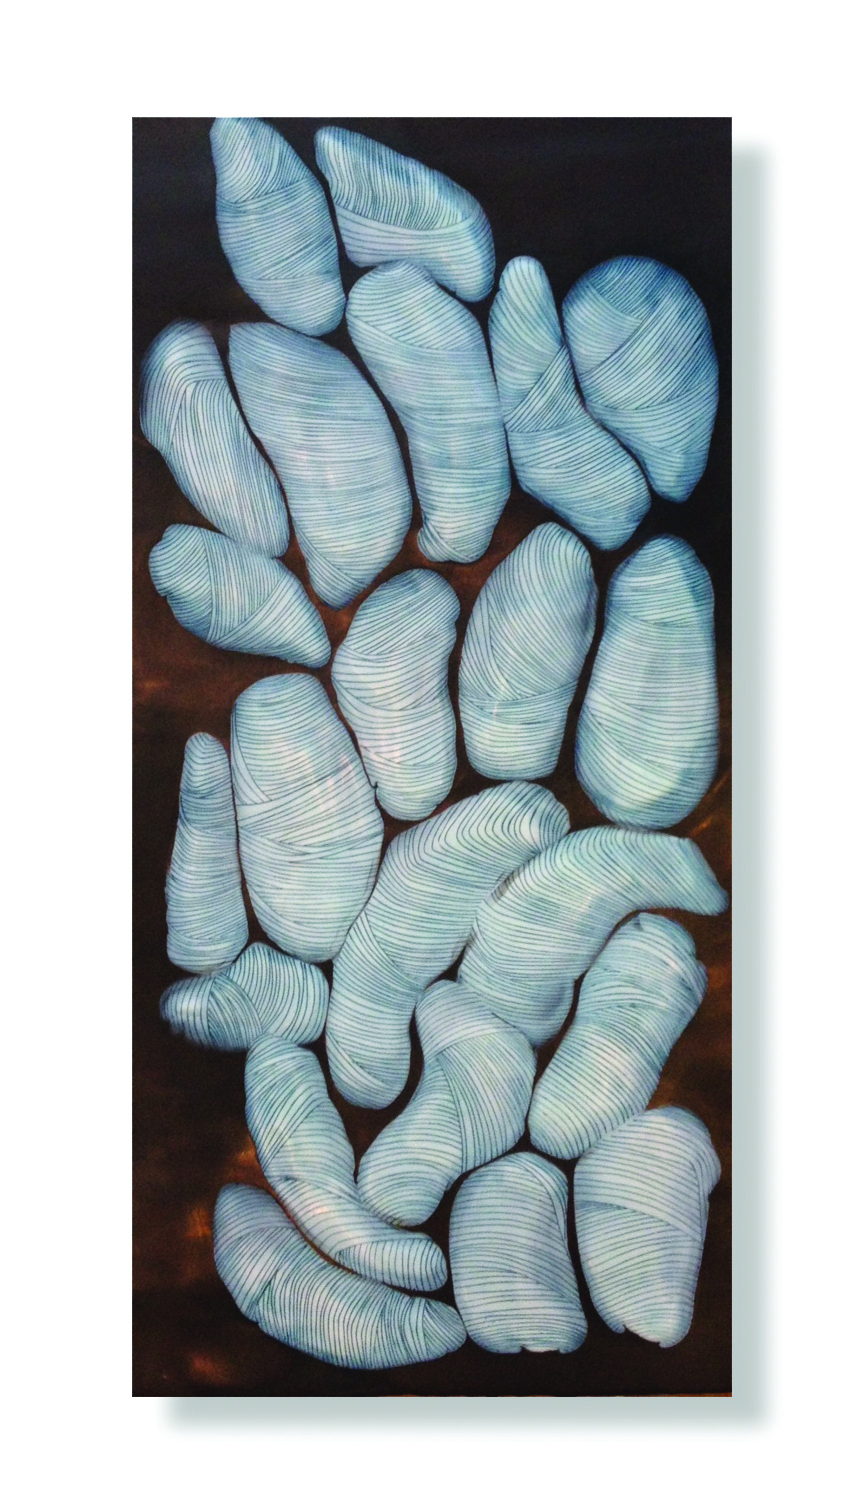  Bundle Theory, 2015 (sold) Encaustic, Oil 24 x 12 x 2 inches 